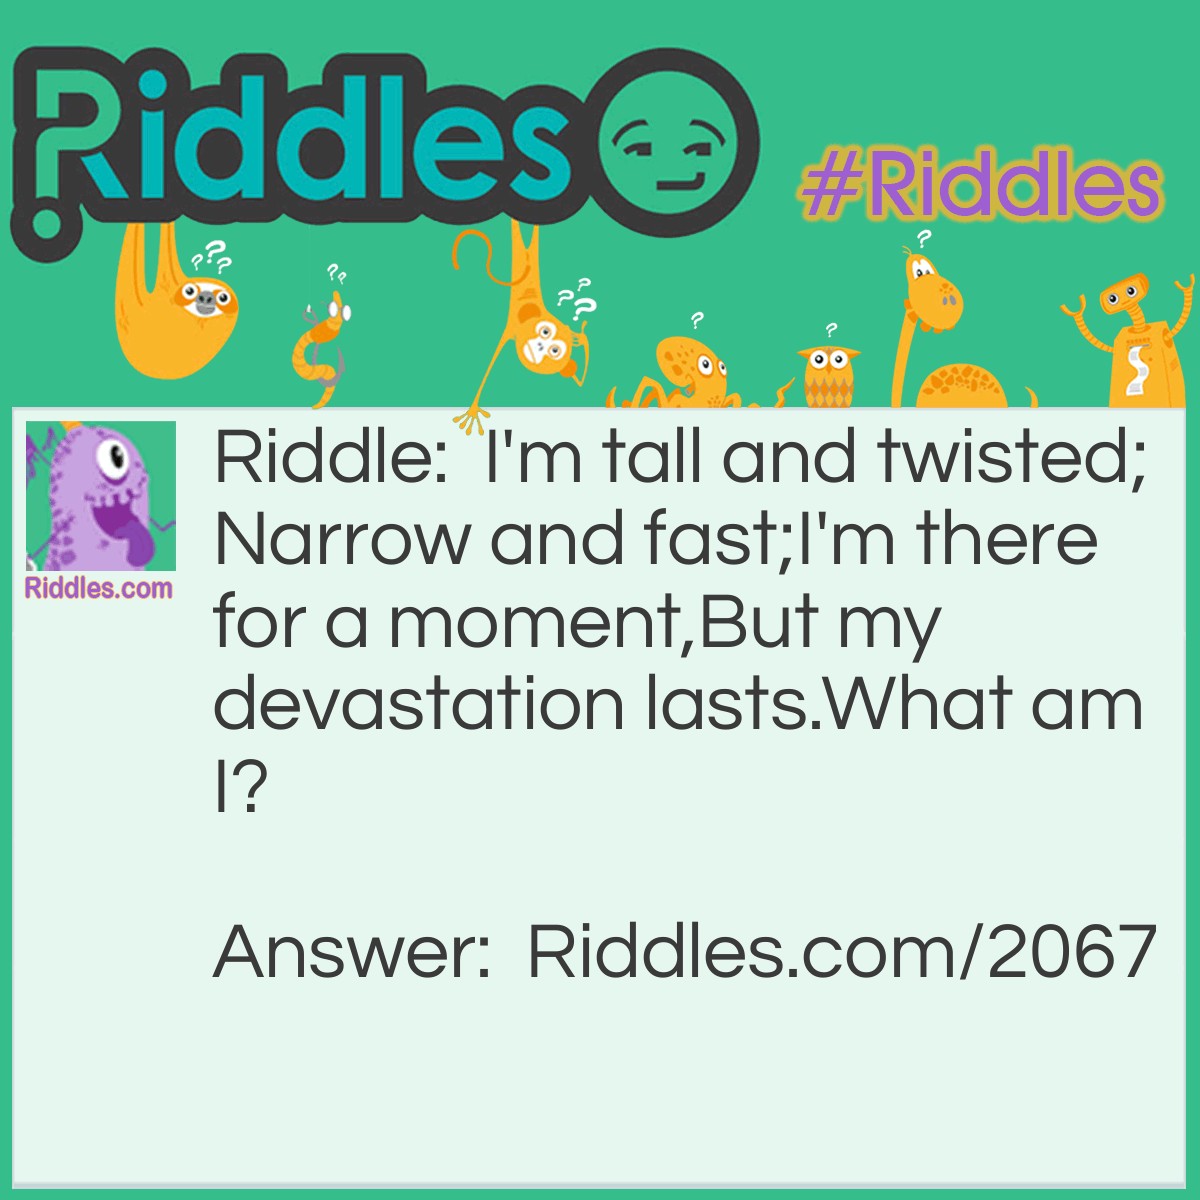 Riddle: I'm tall and twisted;
Narrow and fast;
I'm there for a moment,
But my devastation lasts.
What am I? Answer: A Tornado.